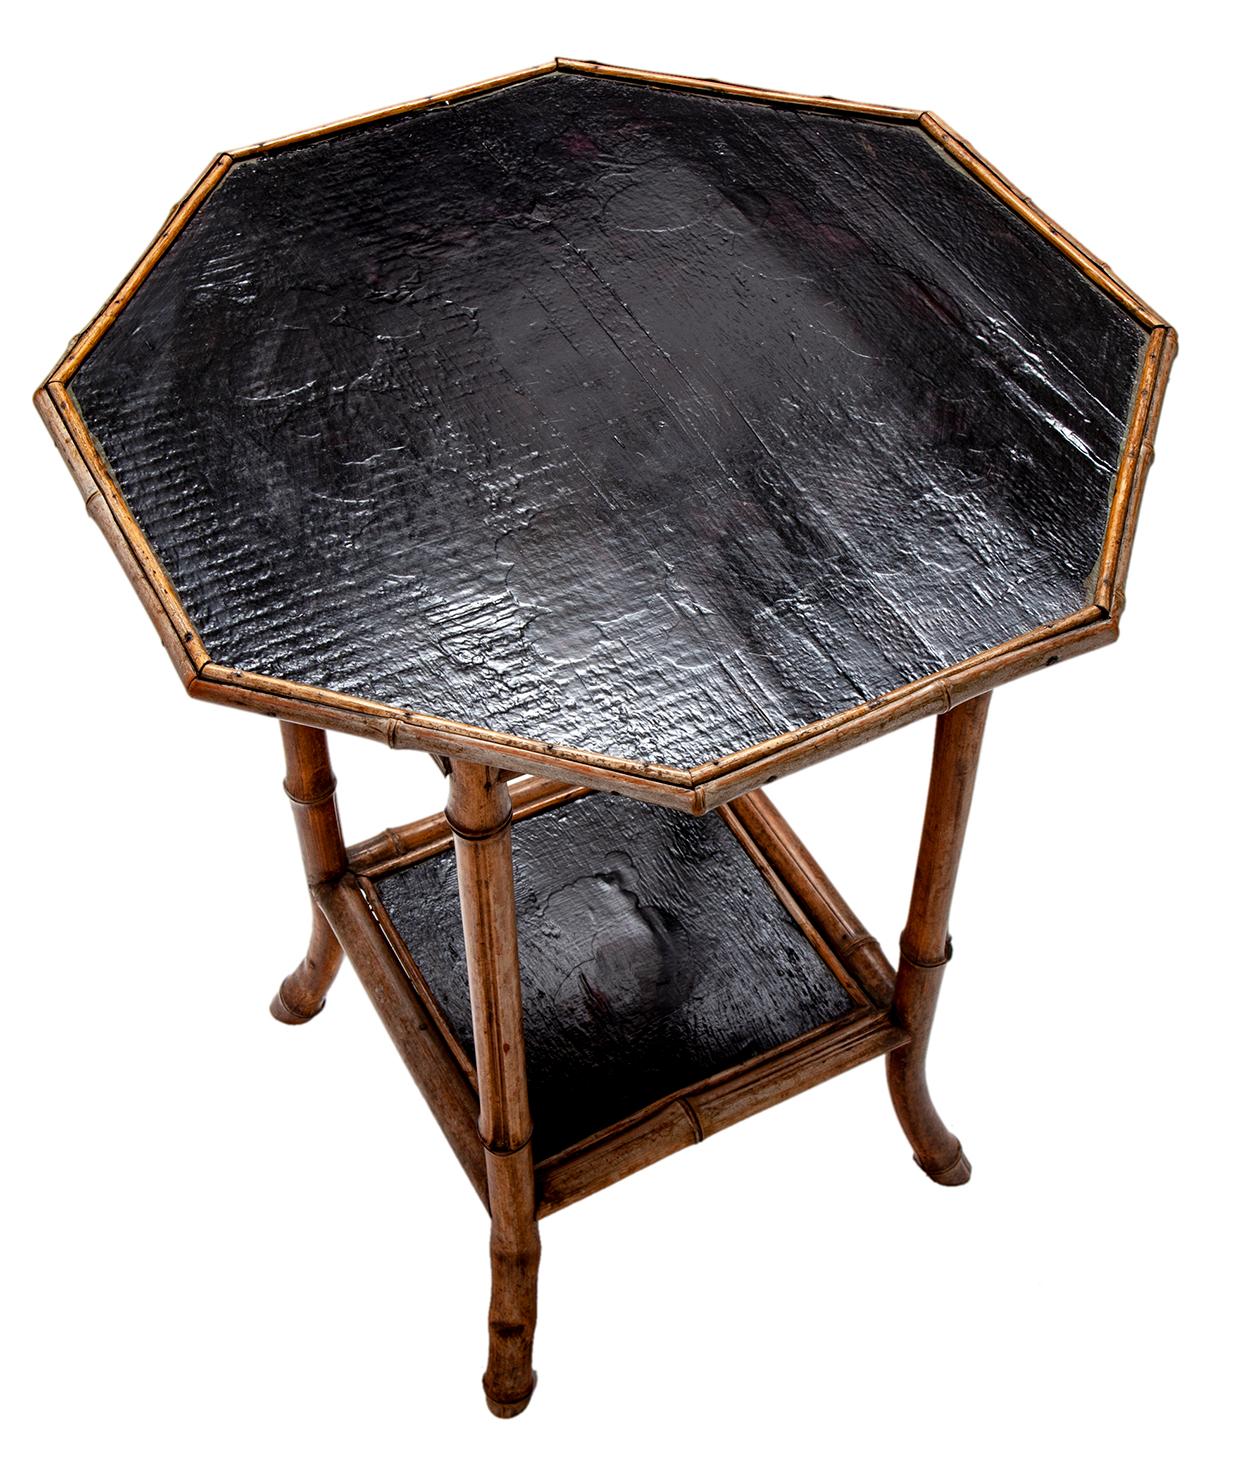 Hand-Crafted Octagonal Bamboo Table For Sale